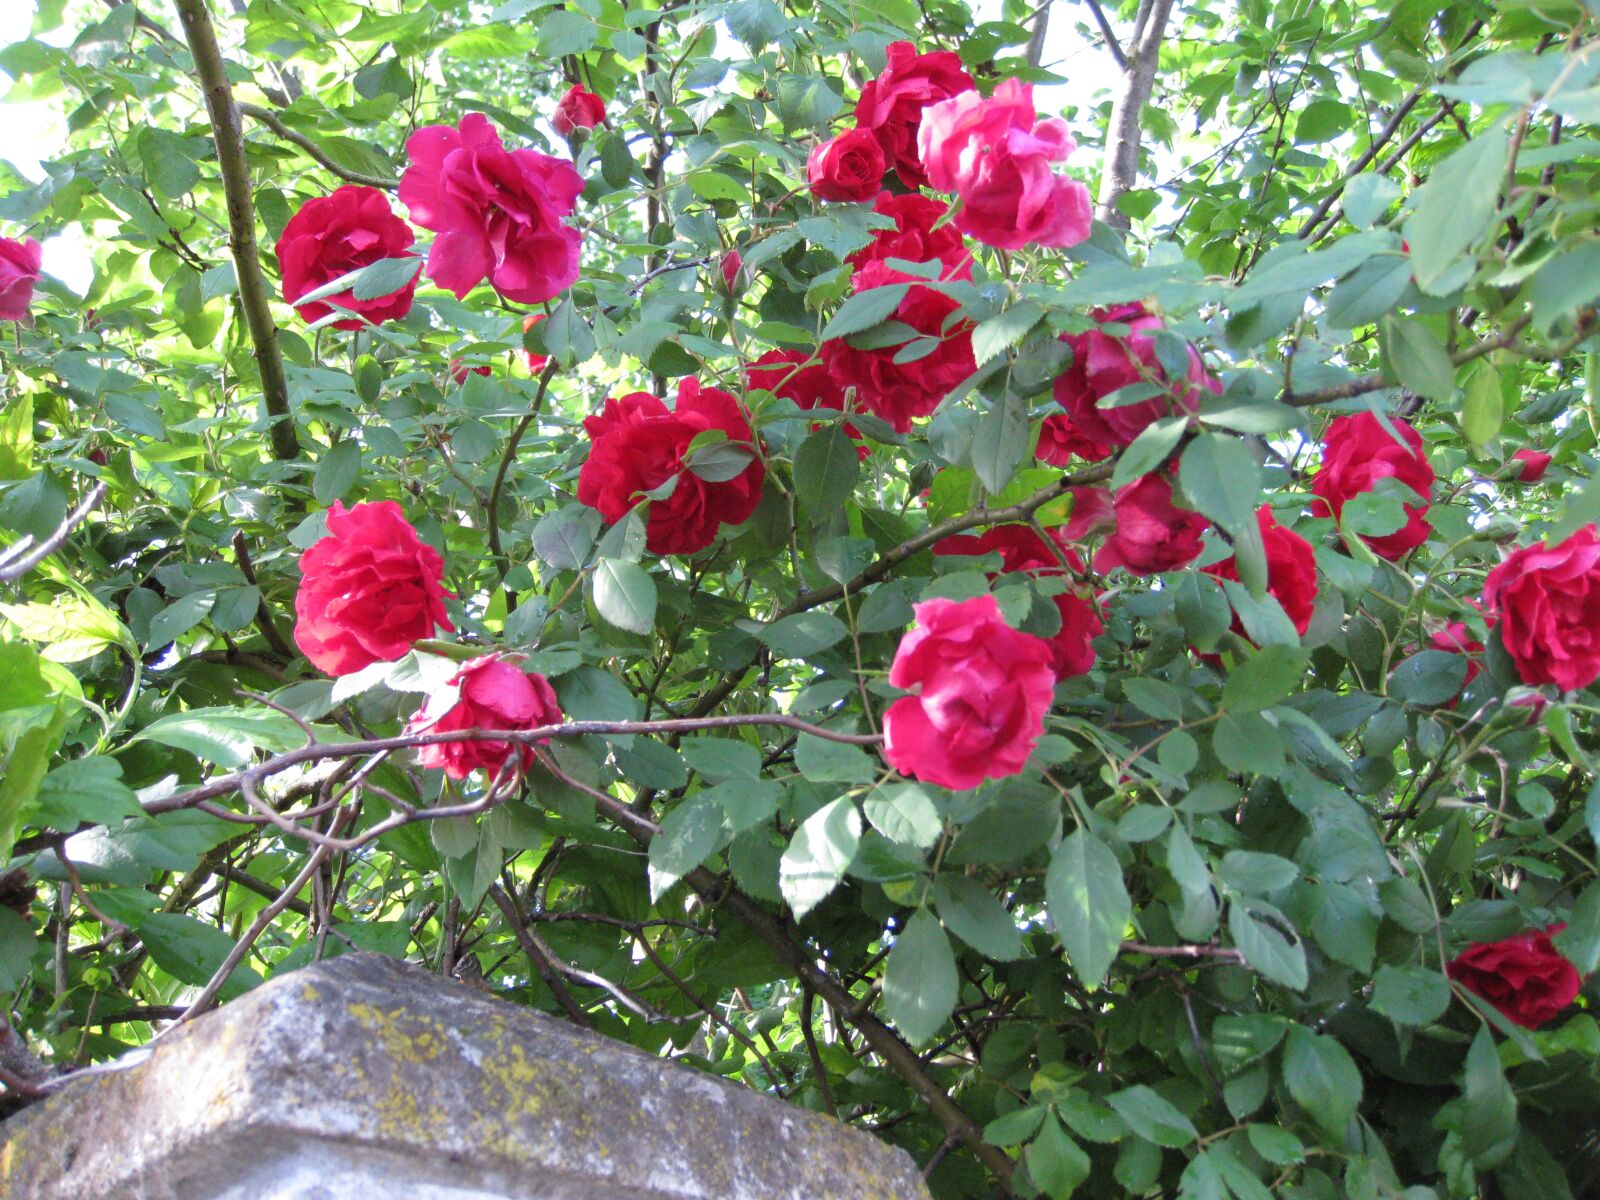 Canon PowerShot SD890 IS (Digital IXUS 970 IS / IXY Digital 820 IS) sample photo. Rose, hedge, nature photography